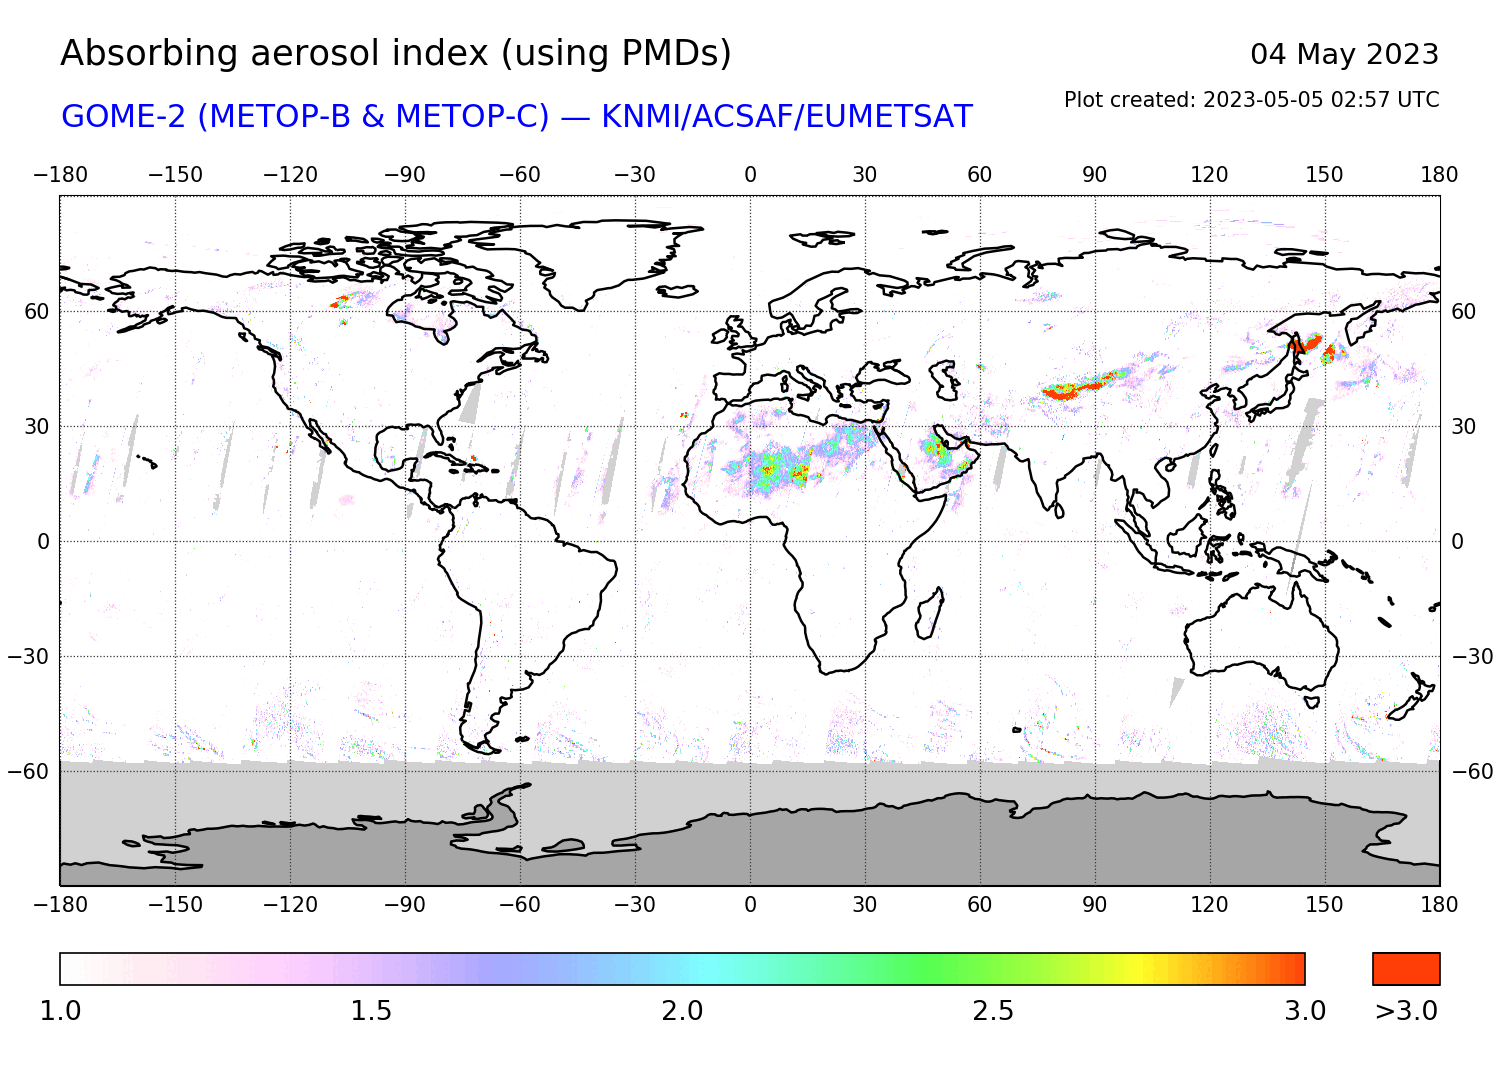 GOME-2 - Absorbing aerosol index of 04 May 2023